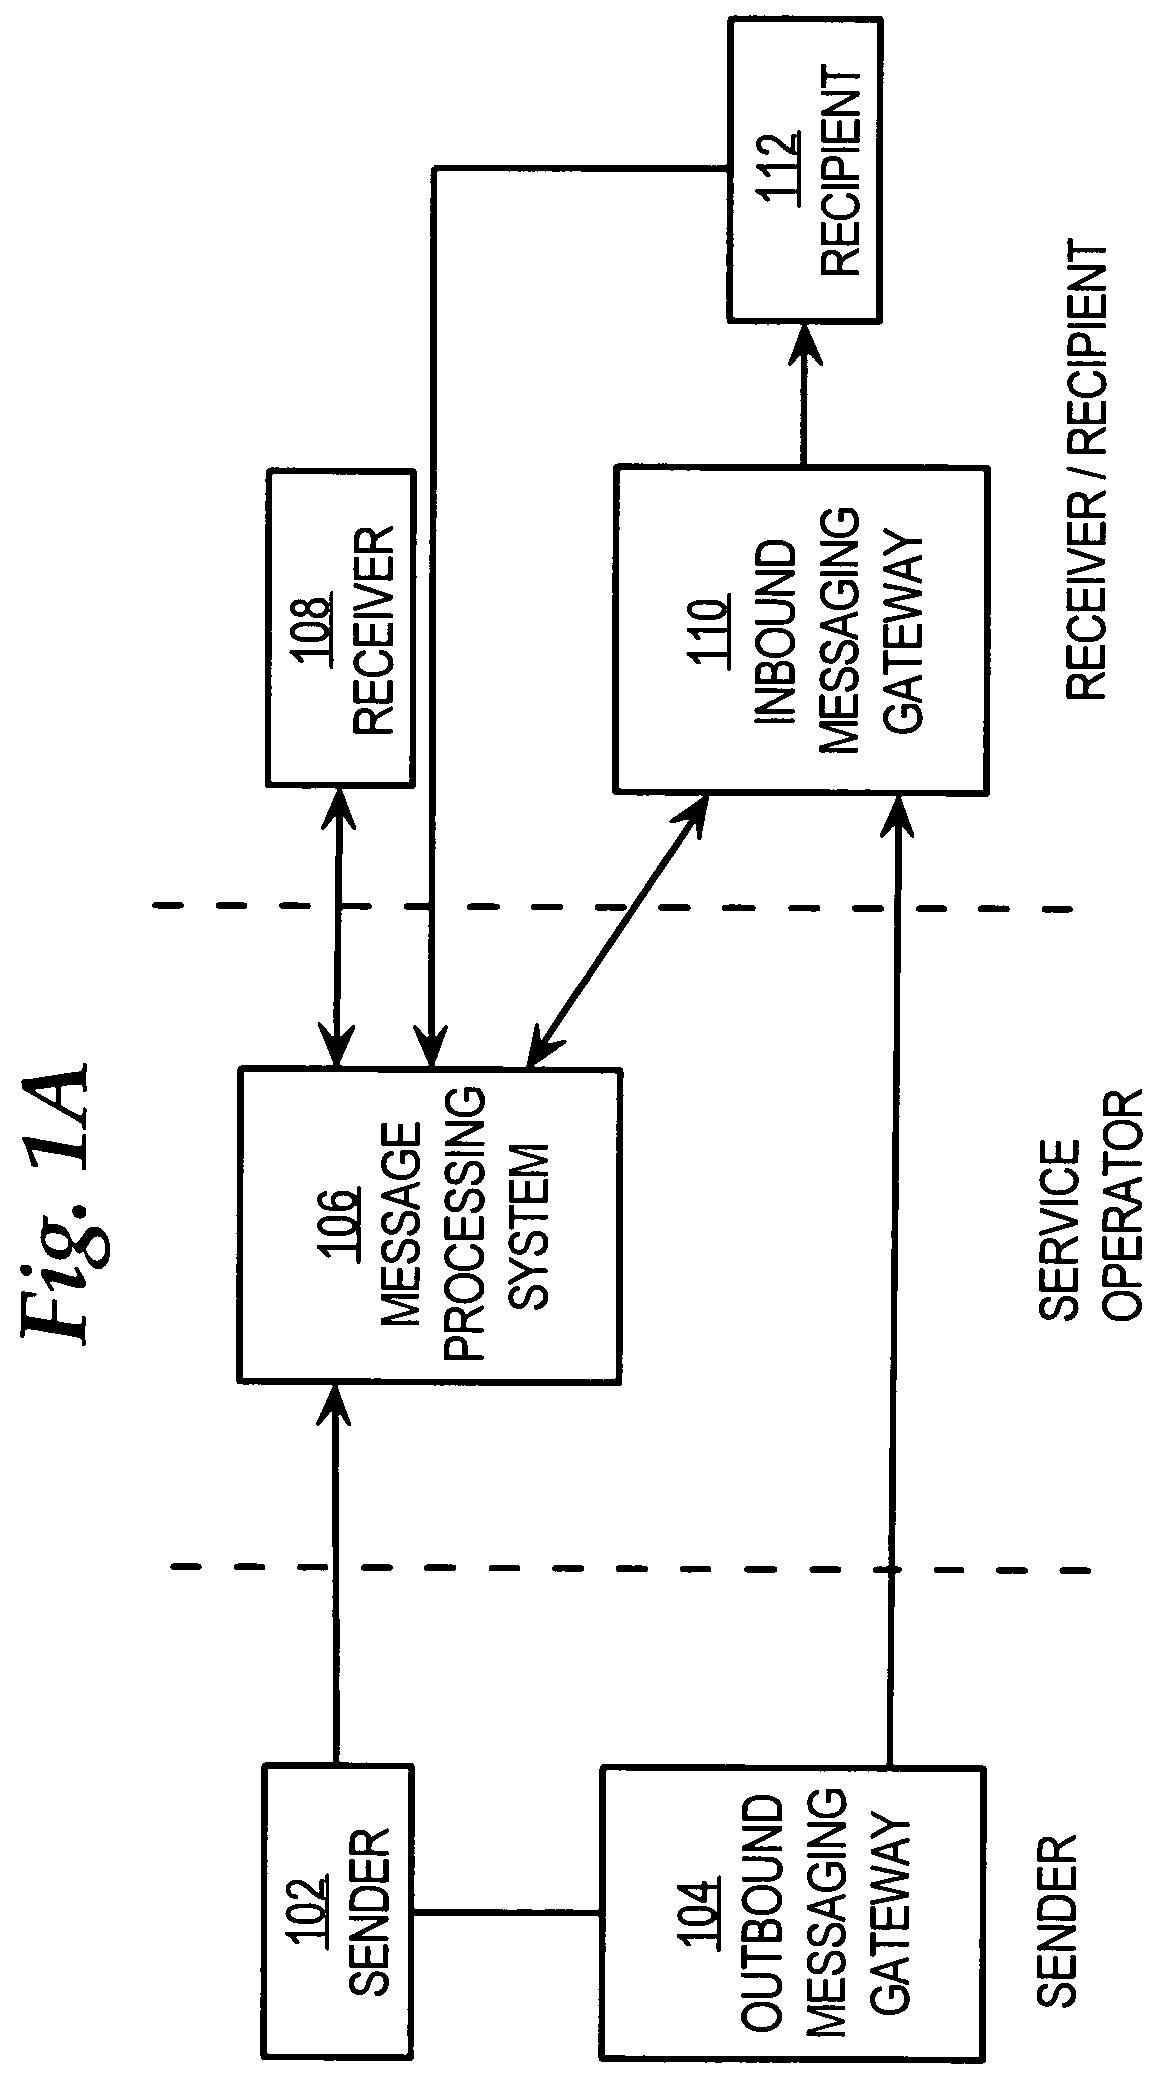 Method of electronic message delivery with penalties for unsolicited messages